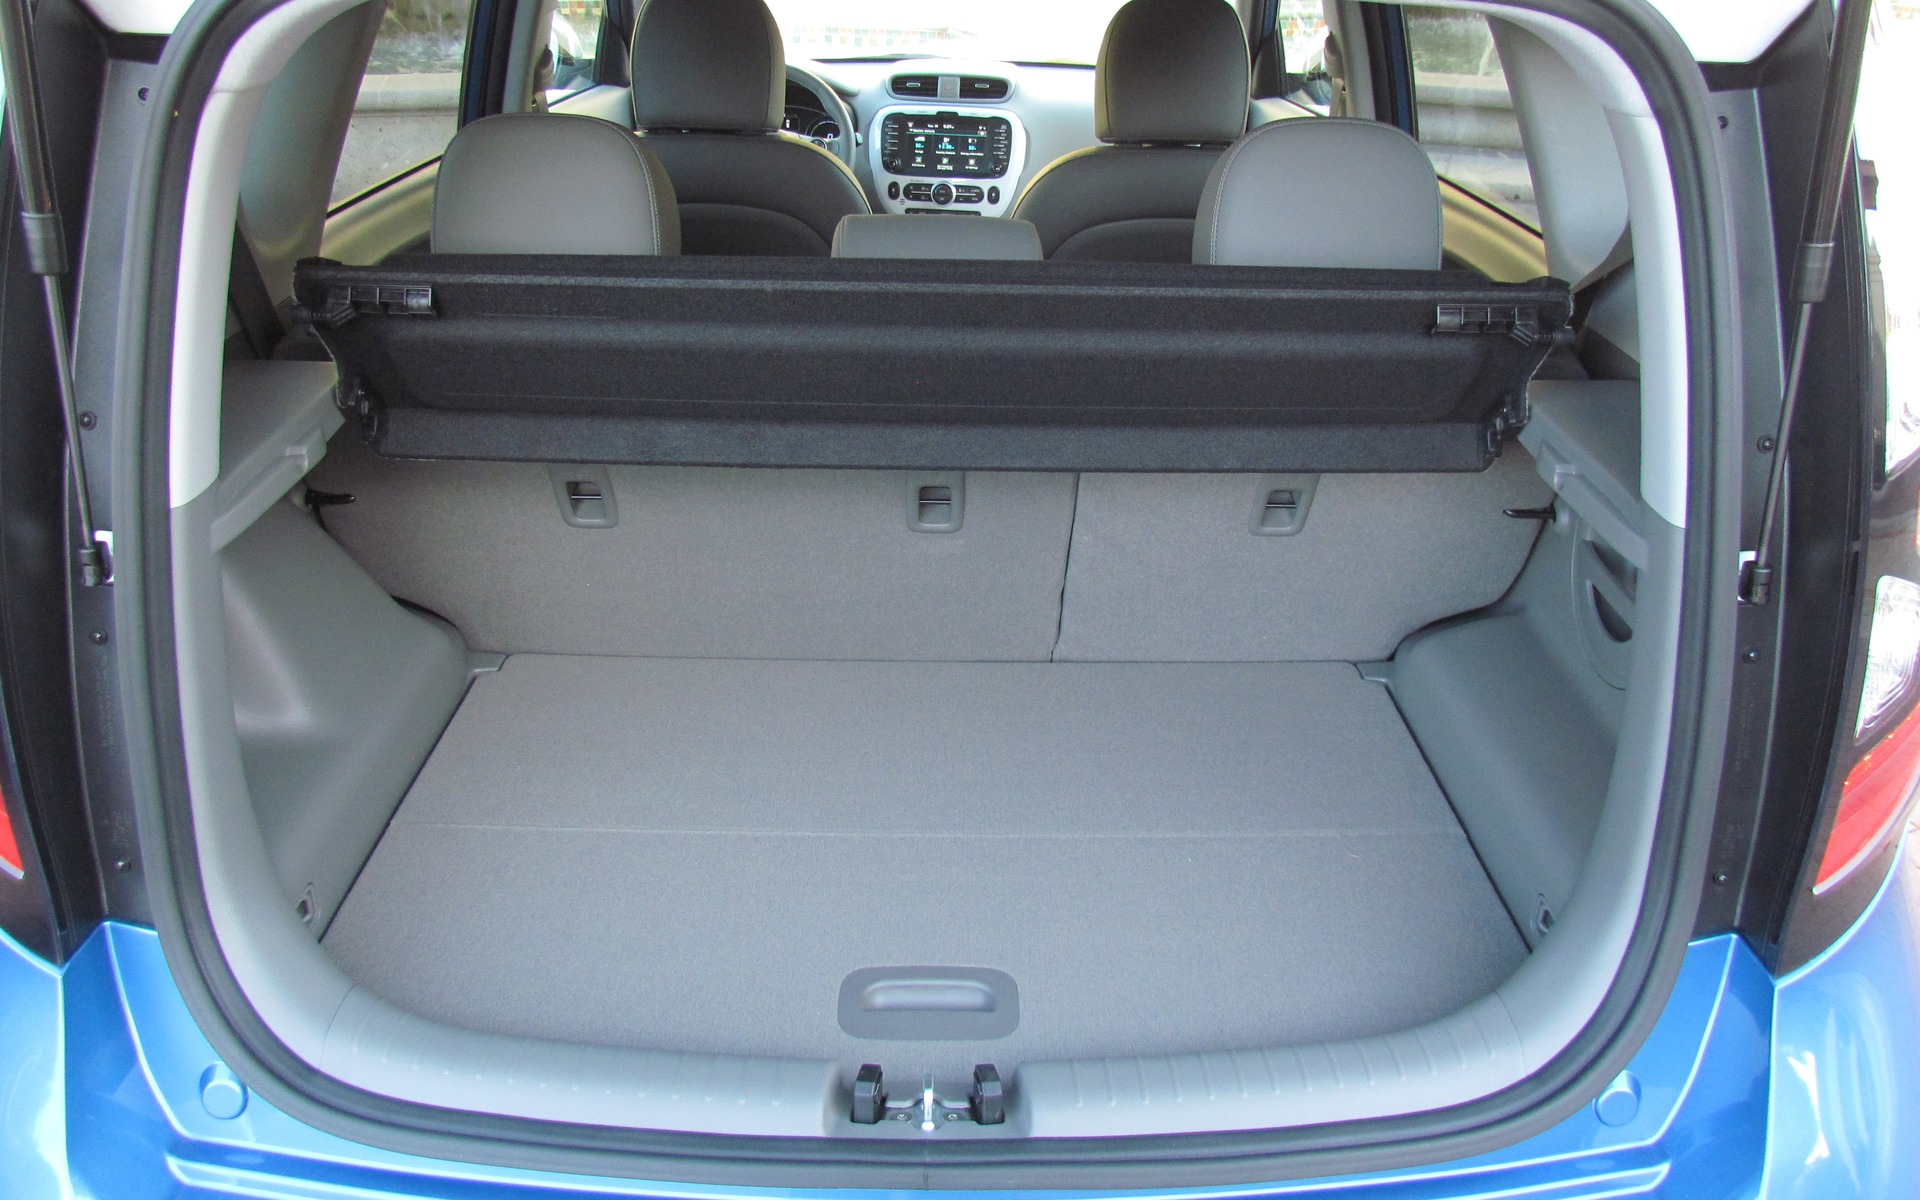 Rear storage capacity is unchanged at 532 litres.